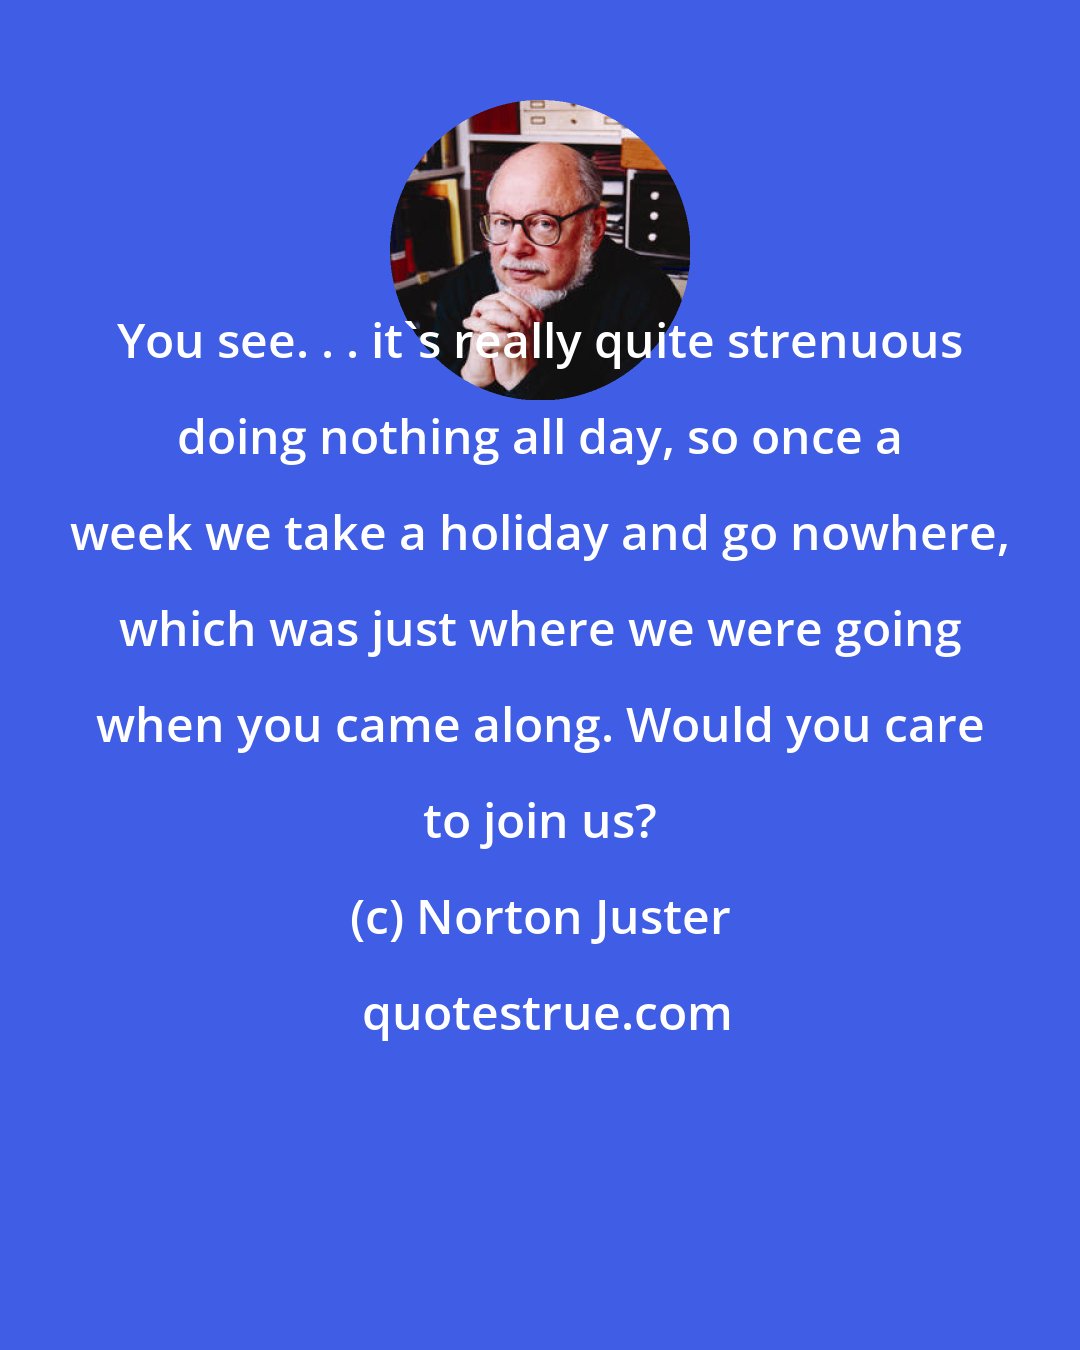 Norton Juster: You see. . . it's really quite strenuous doing nothing all day, so once a week we take a holiday and go nowhere, which was just where we were going when you came along. Would you care to join us?